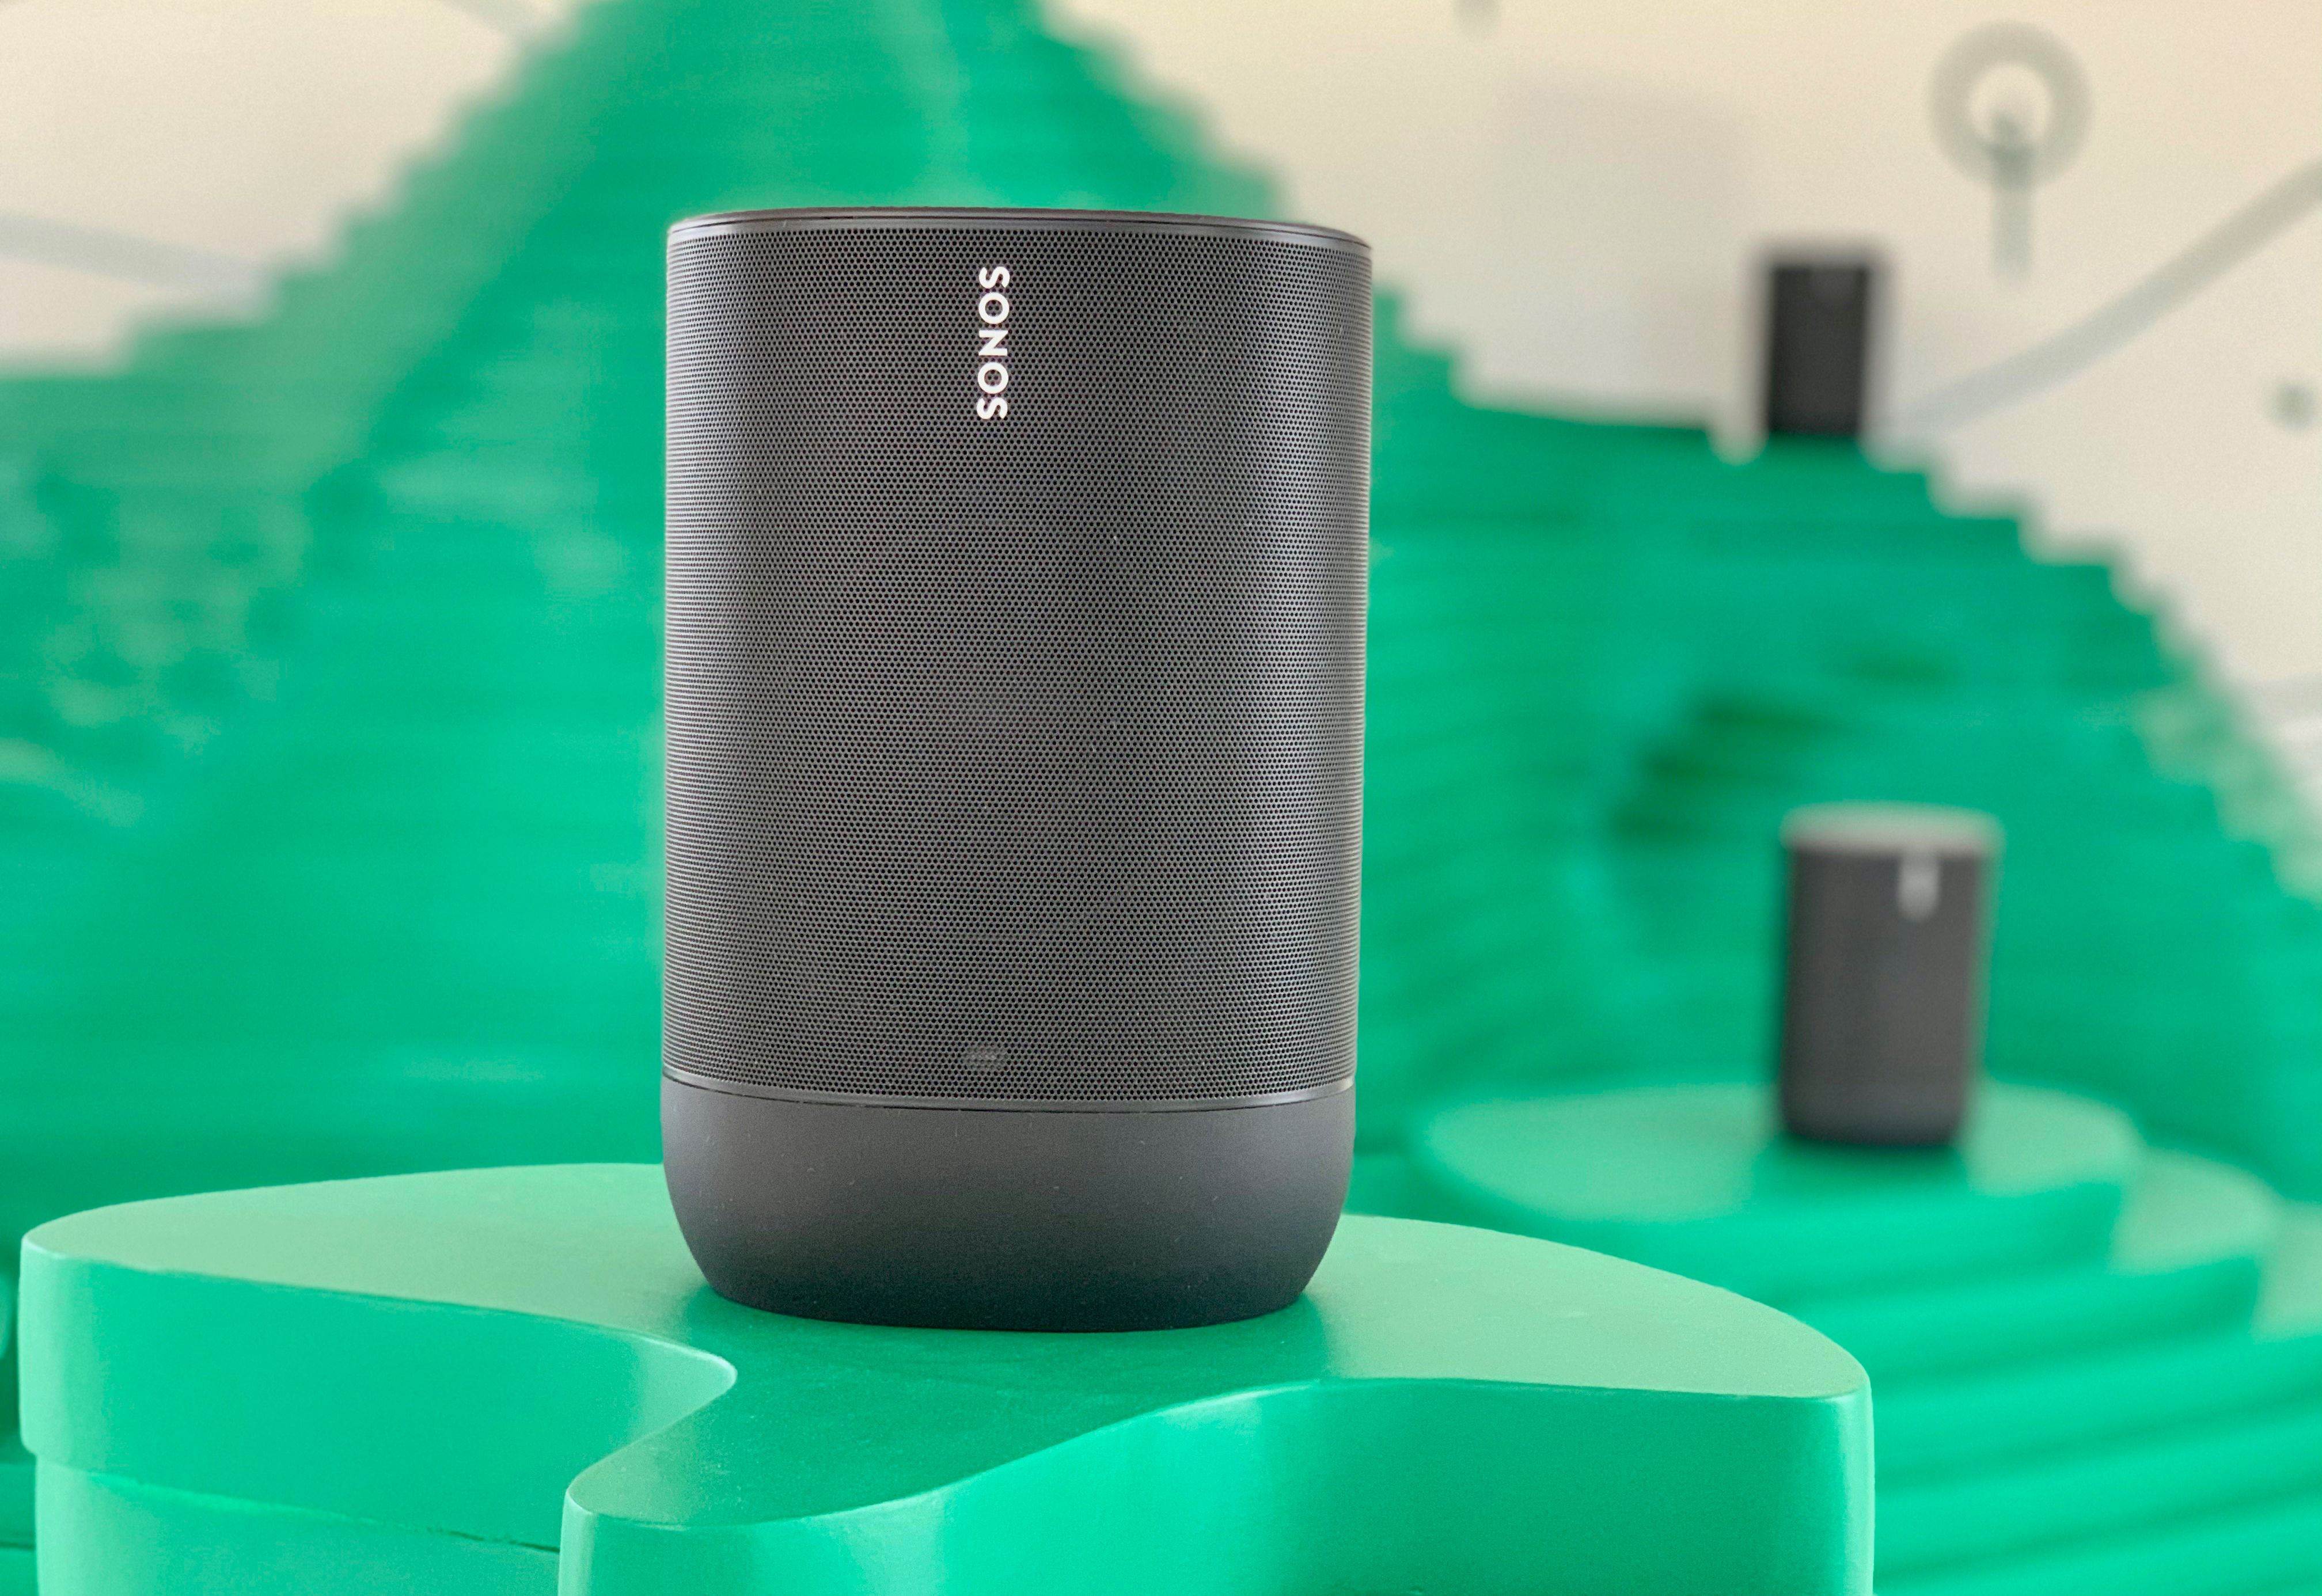 Underinddel Mening Vandt Sonos is ending support for some hardware. Here's what it means for you |  CNN Underscored